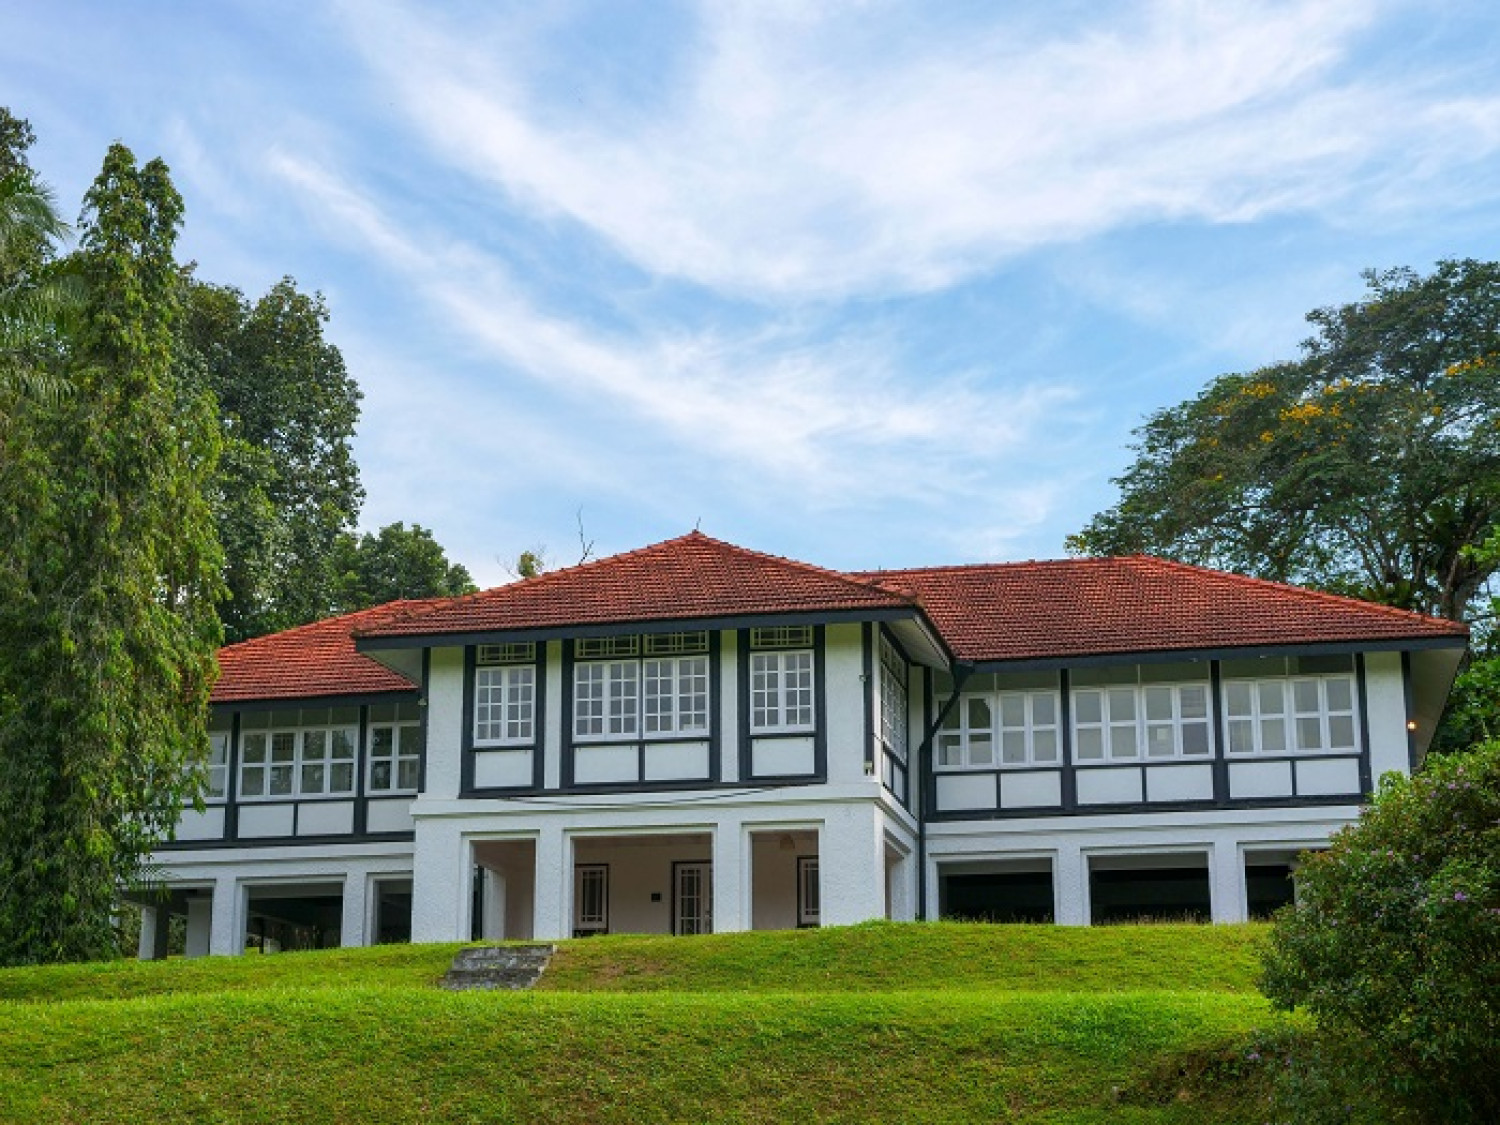 Colliers takes over leasing and management of 183 heritage bungalows - Property News